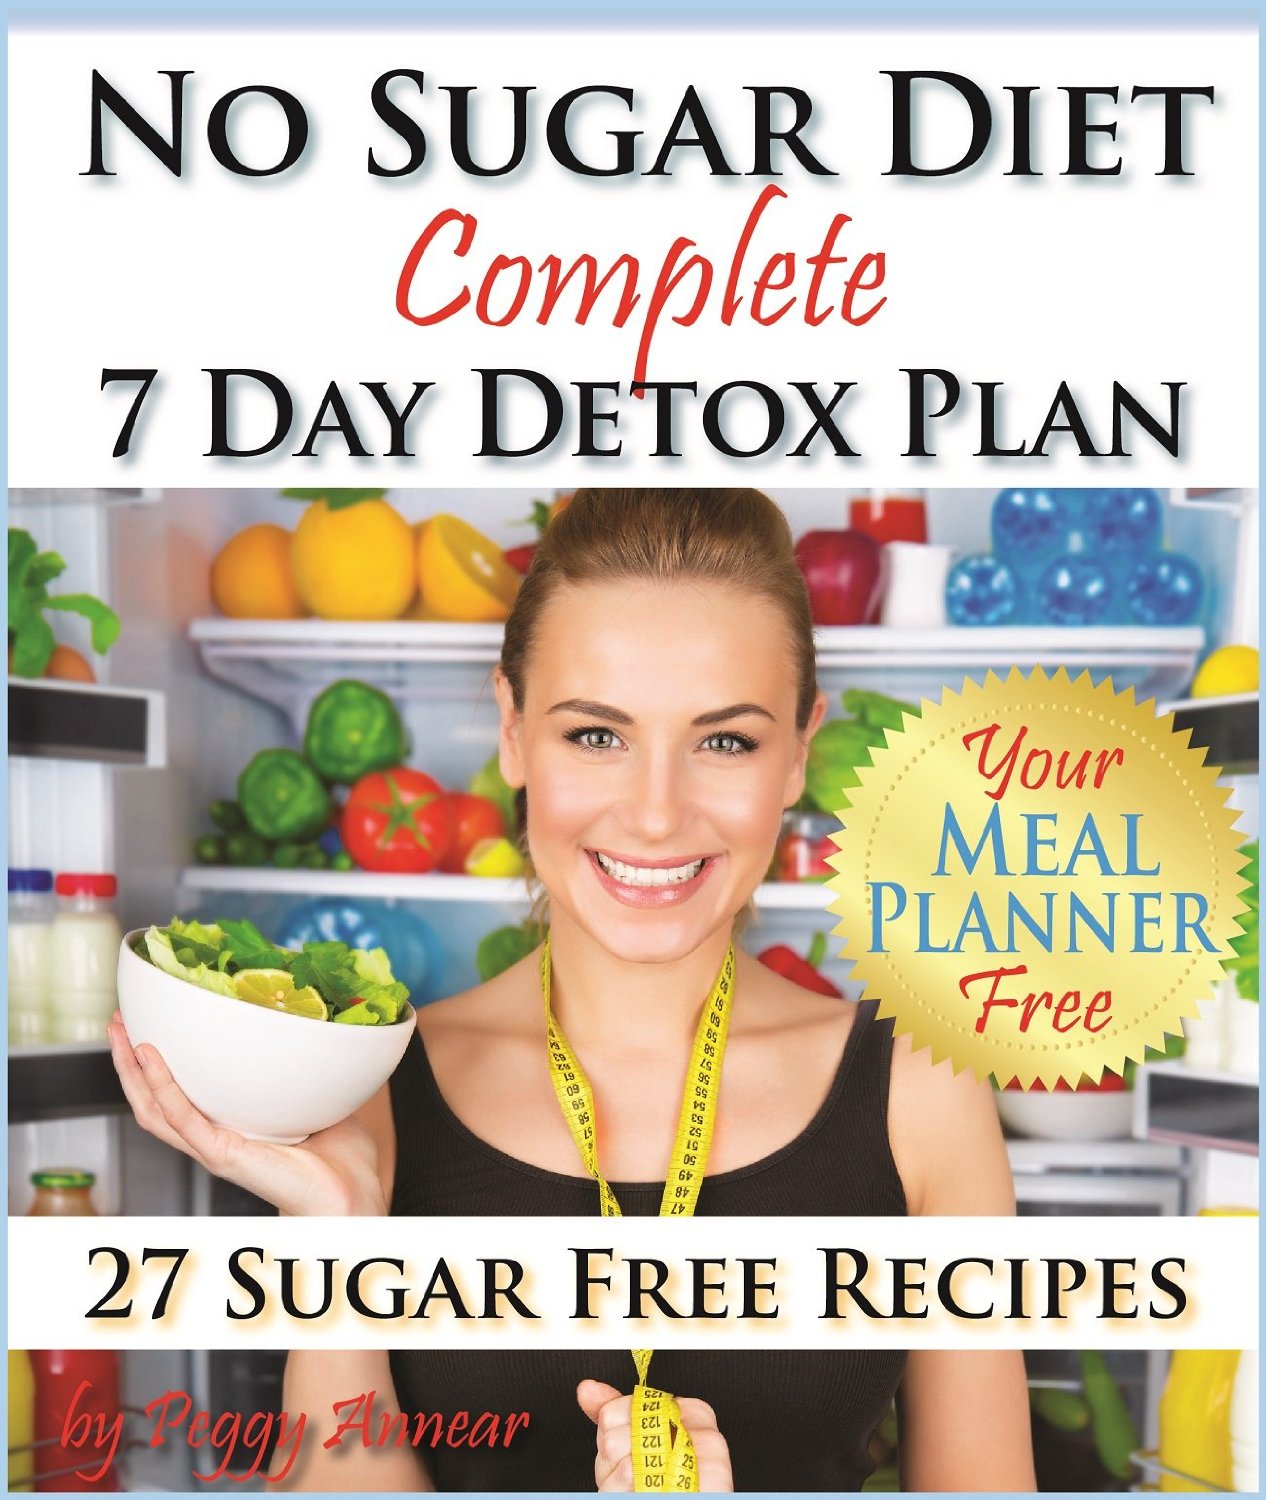 A Complete No Sugar Diet Book, 7 Day Sugar Detox for Beginners, Recipes & How to Quit Sugar Cravings by Peggy Annear